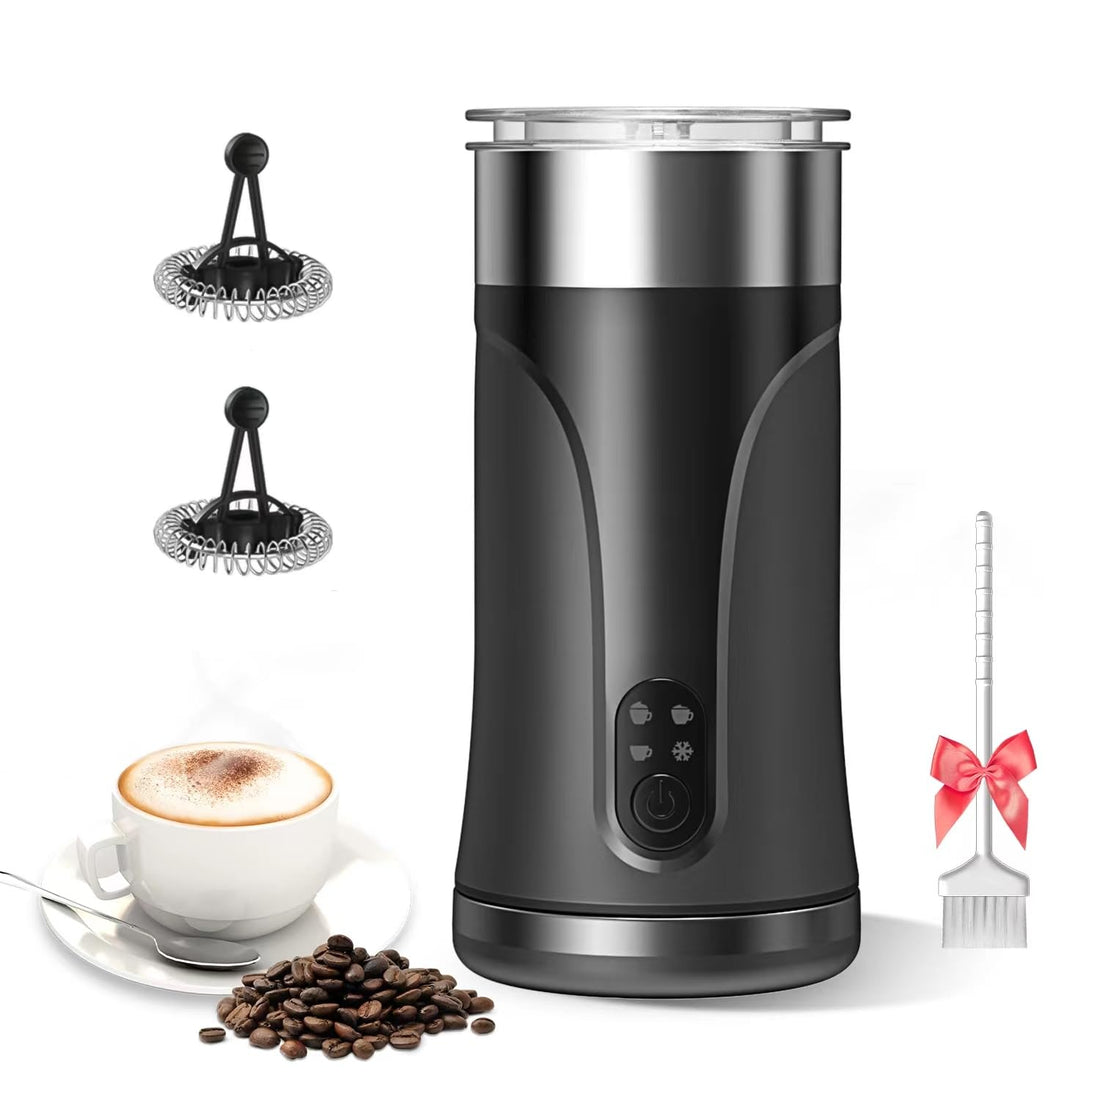 Milk Frother, Milk Frother and Steamer, Non-Slip Stainless Coffee Frother,4 IN 1 Hot & Cold Foam Maker with Temperature Control, Auto Frother for Coffee, Latte, Cappuccino, Macchiato,BPA Free (Black)